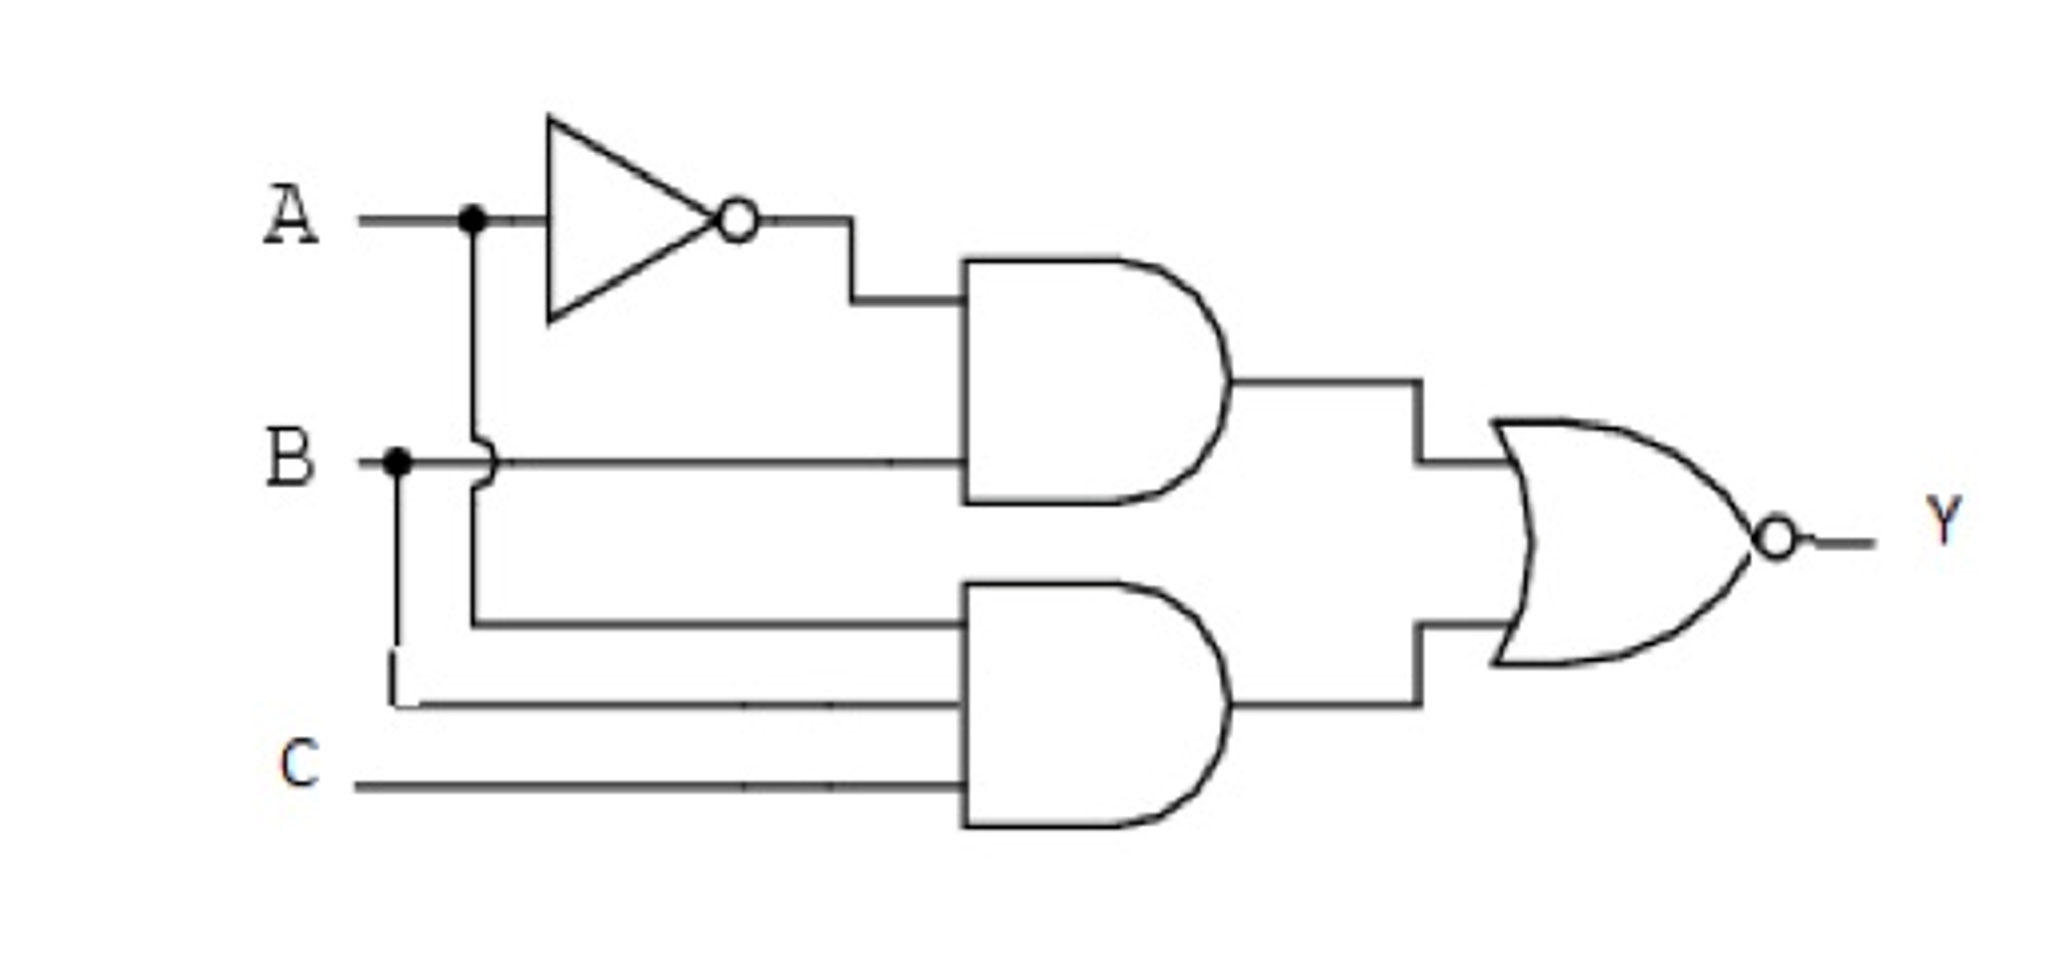 vhdl selected signal assignment